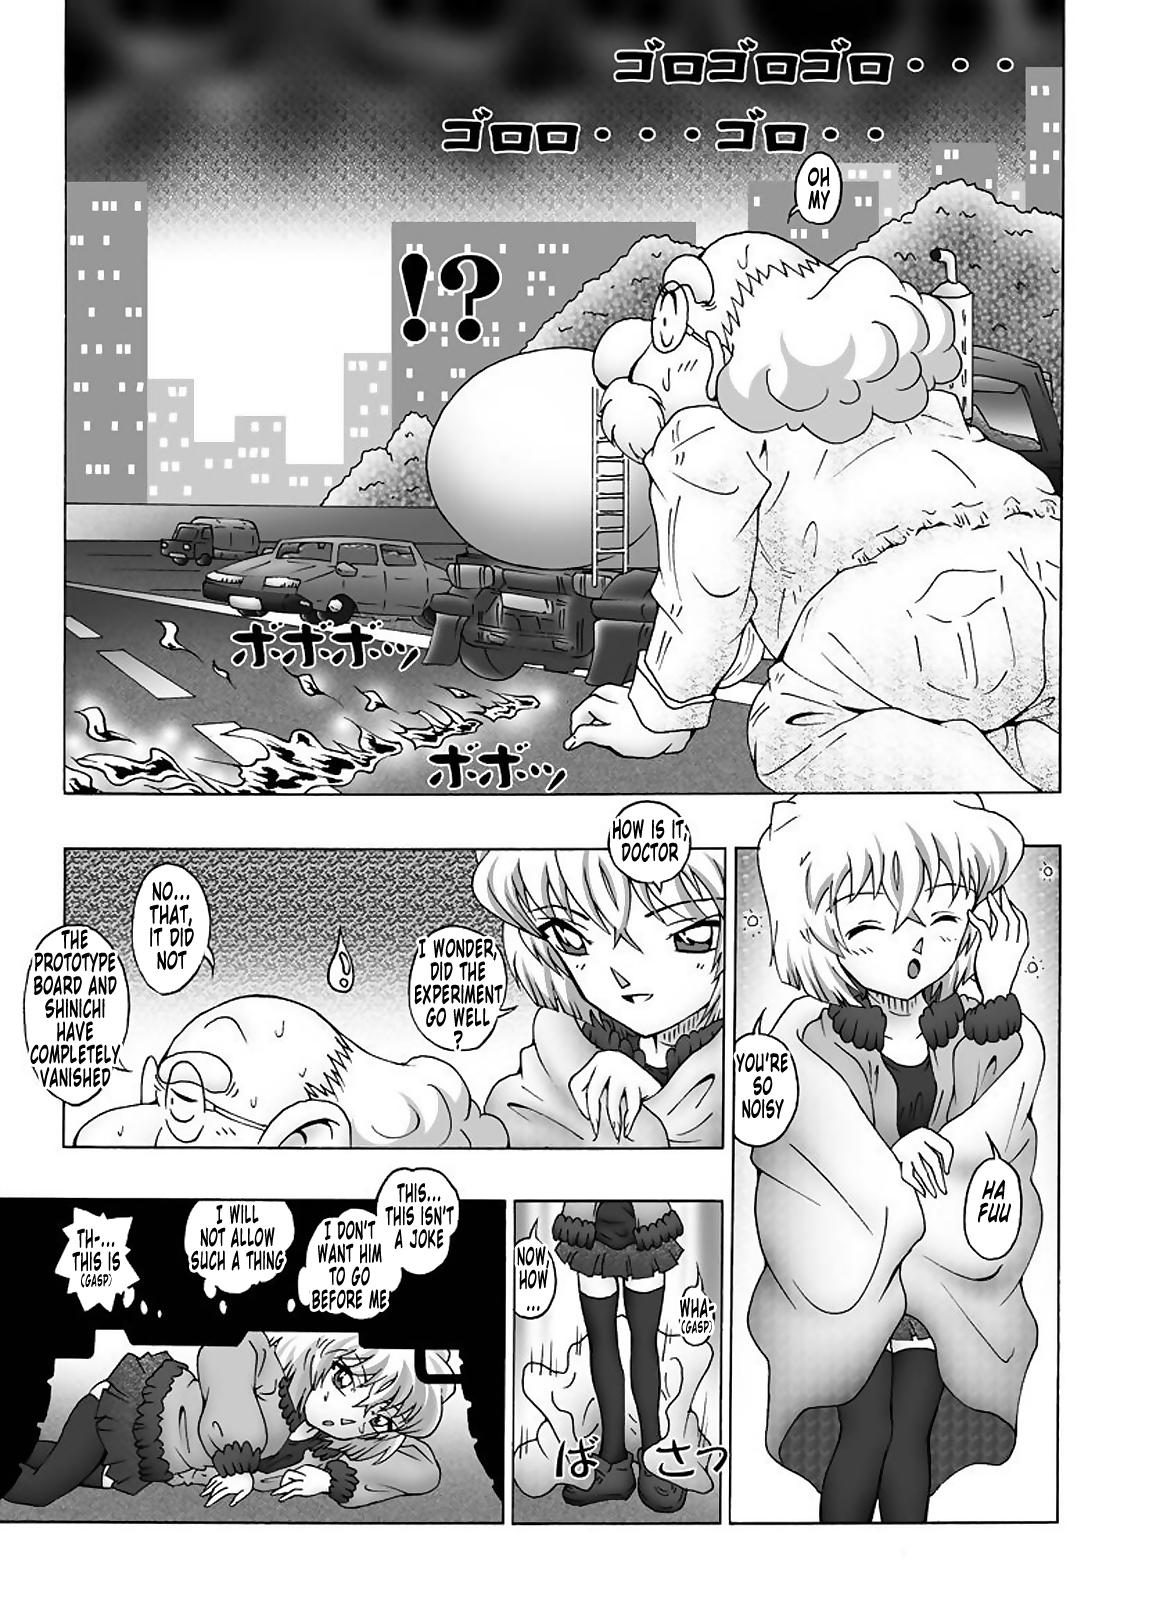 Interracial Hardcore Bumbling Detective Conan - File 12: The Case of Back To The Future - Detective conan Best Blowjobs - Page 6